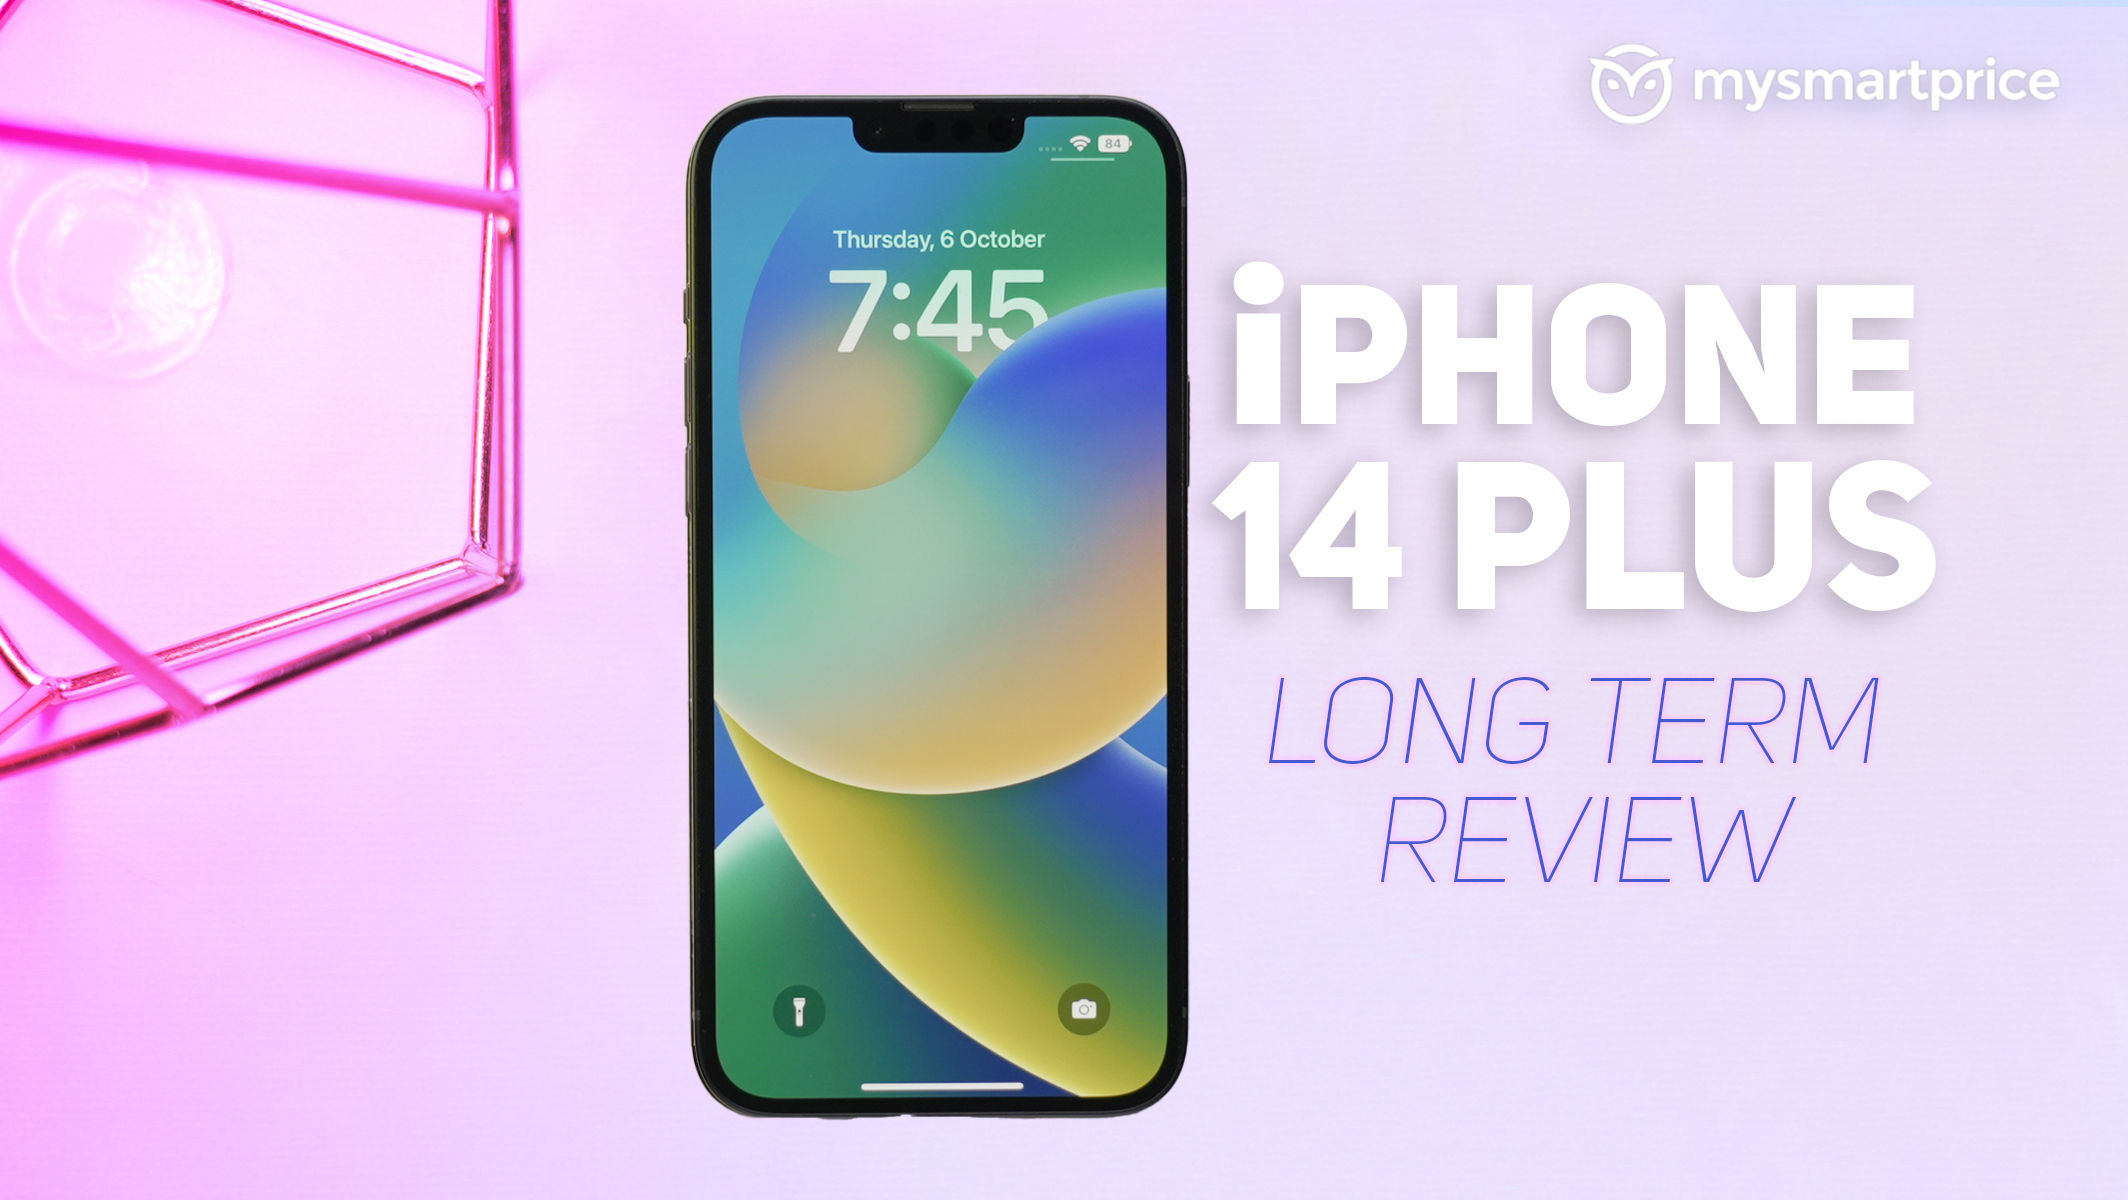 iPhone 14 Plus long-term review: 5 months after launch, is it